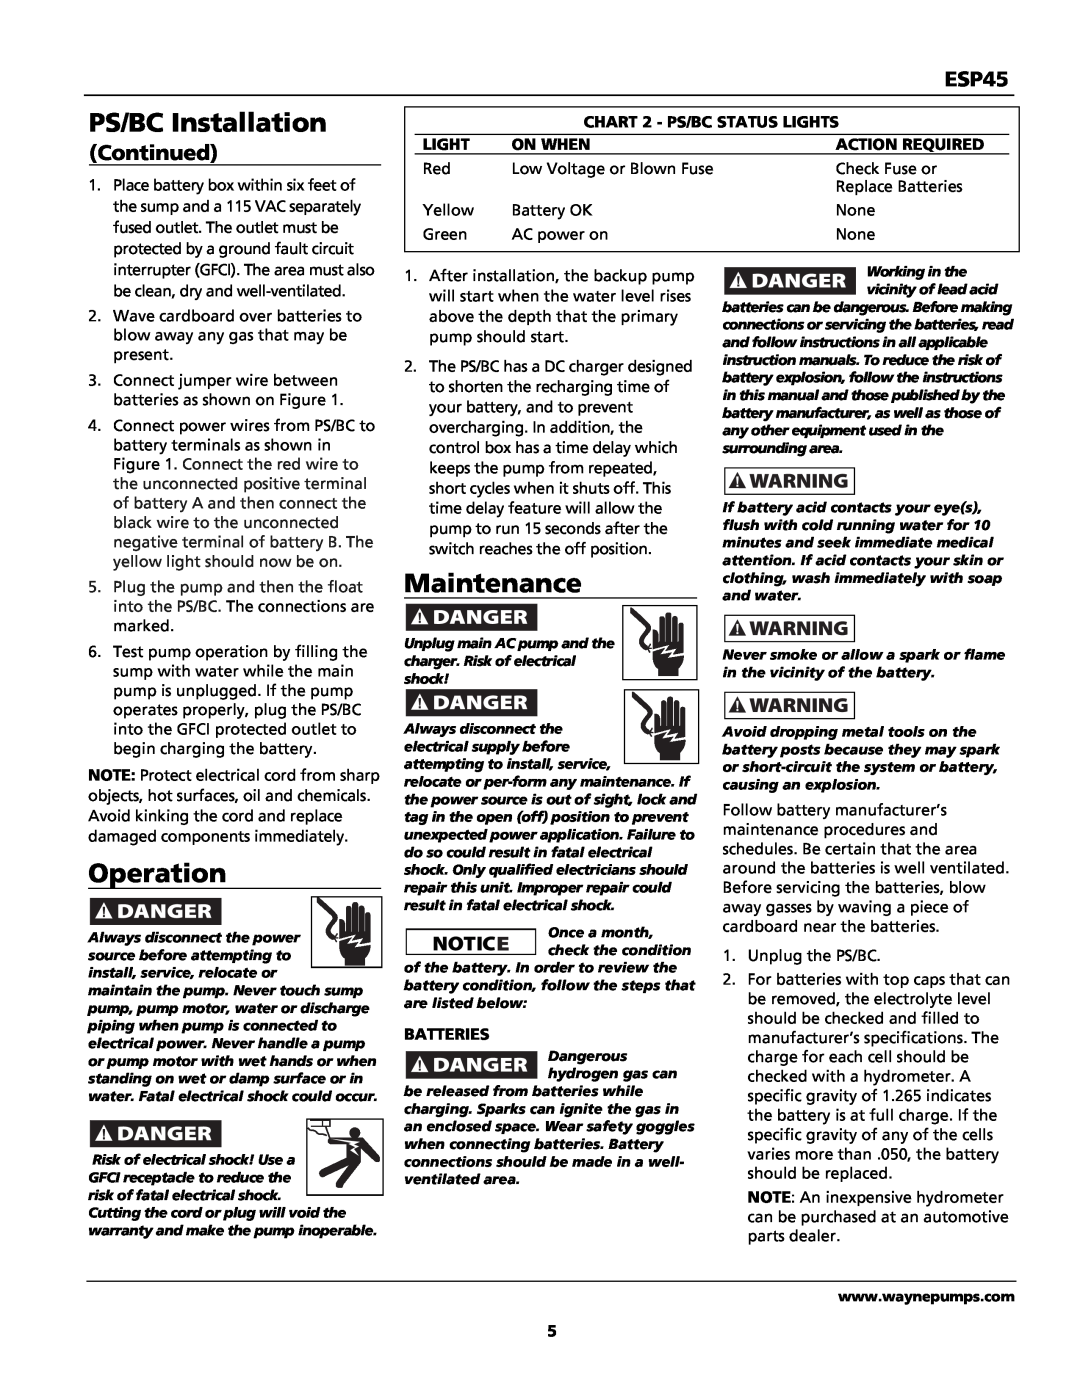 Wayne 353601-001 Maintenance, Operation, ESP45, CHART 2 - PS/BC STATUS LIGHTS, Light, On When, Action Required, Batteries 